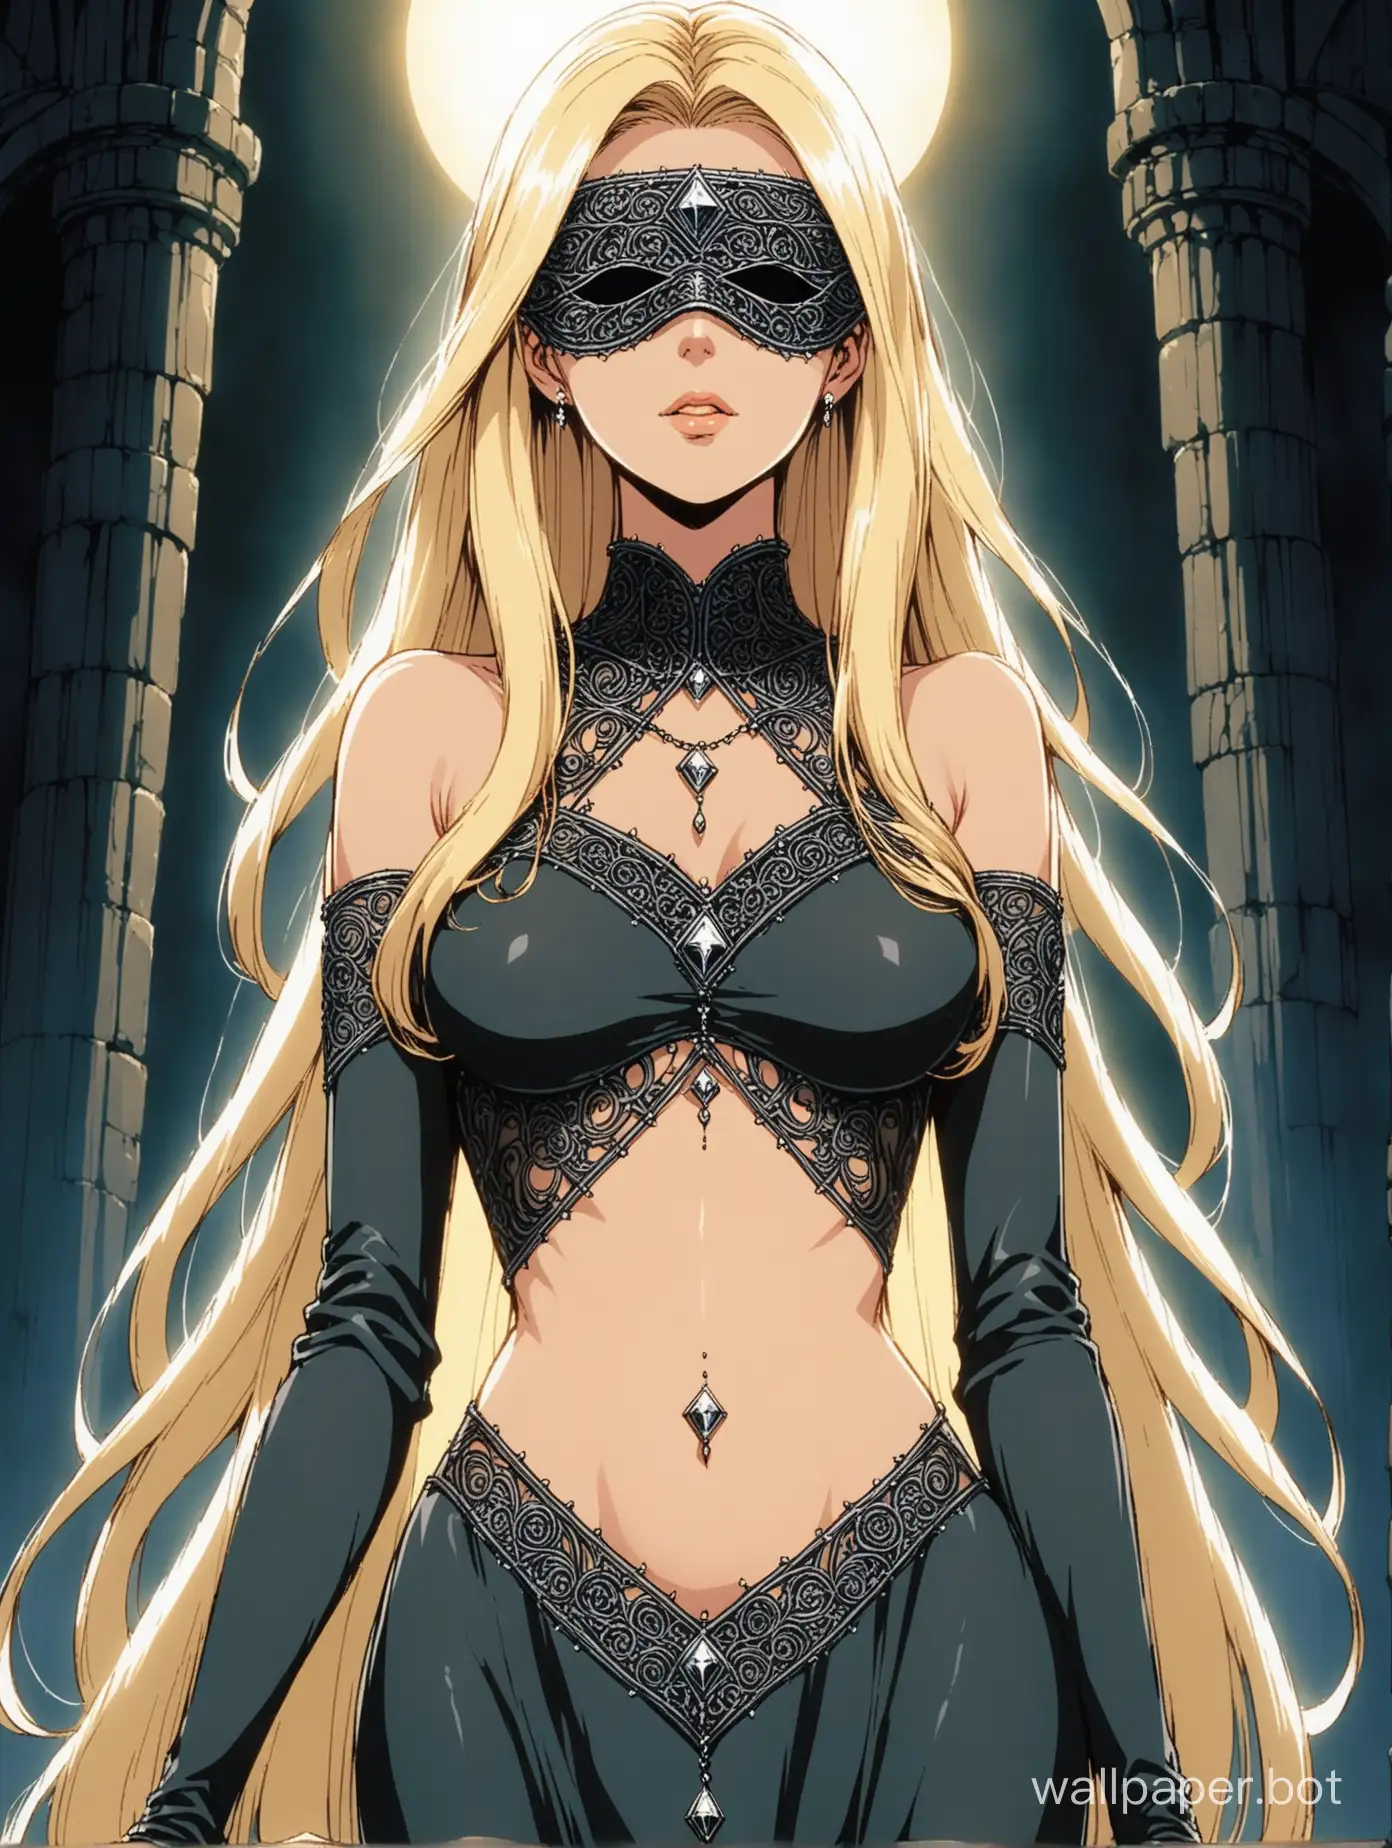 Elegant-WhiteHaired-Woman-in-Ornate-Blindfold-and-Retro-Anime-Attire